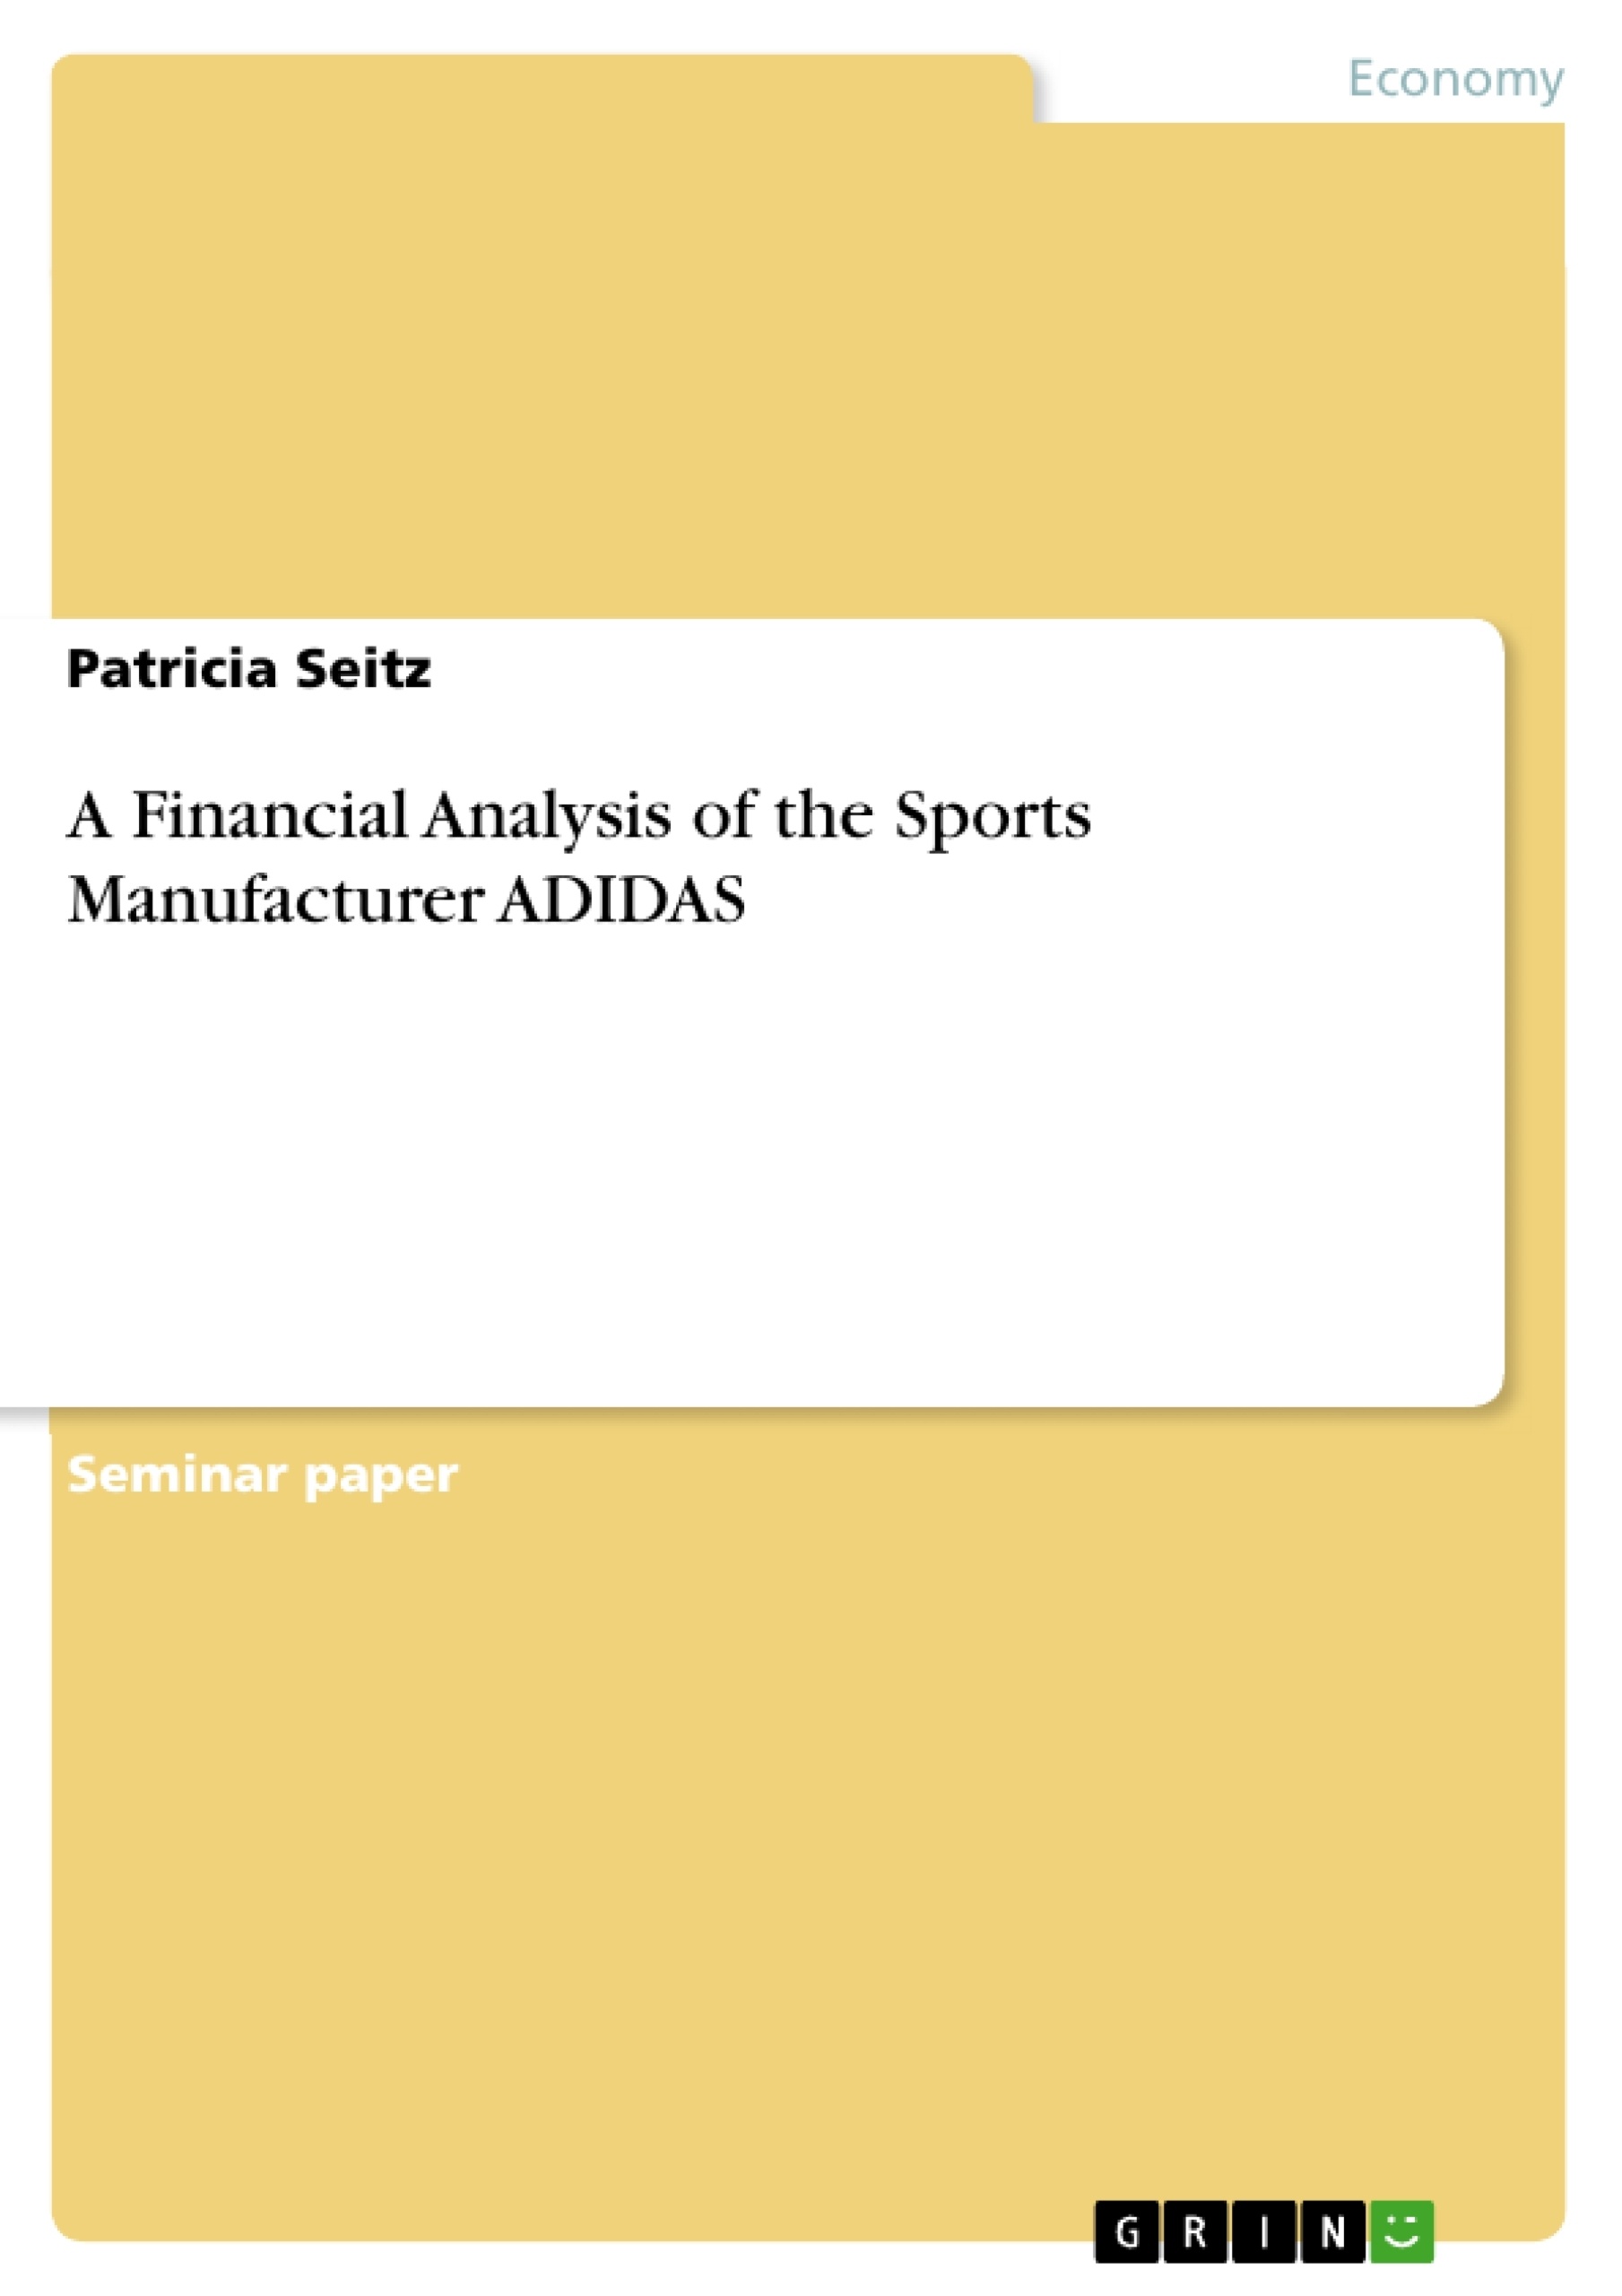 Title: A Financial Analysis of the Sports Manufacturer ADIDAS